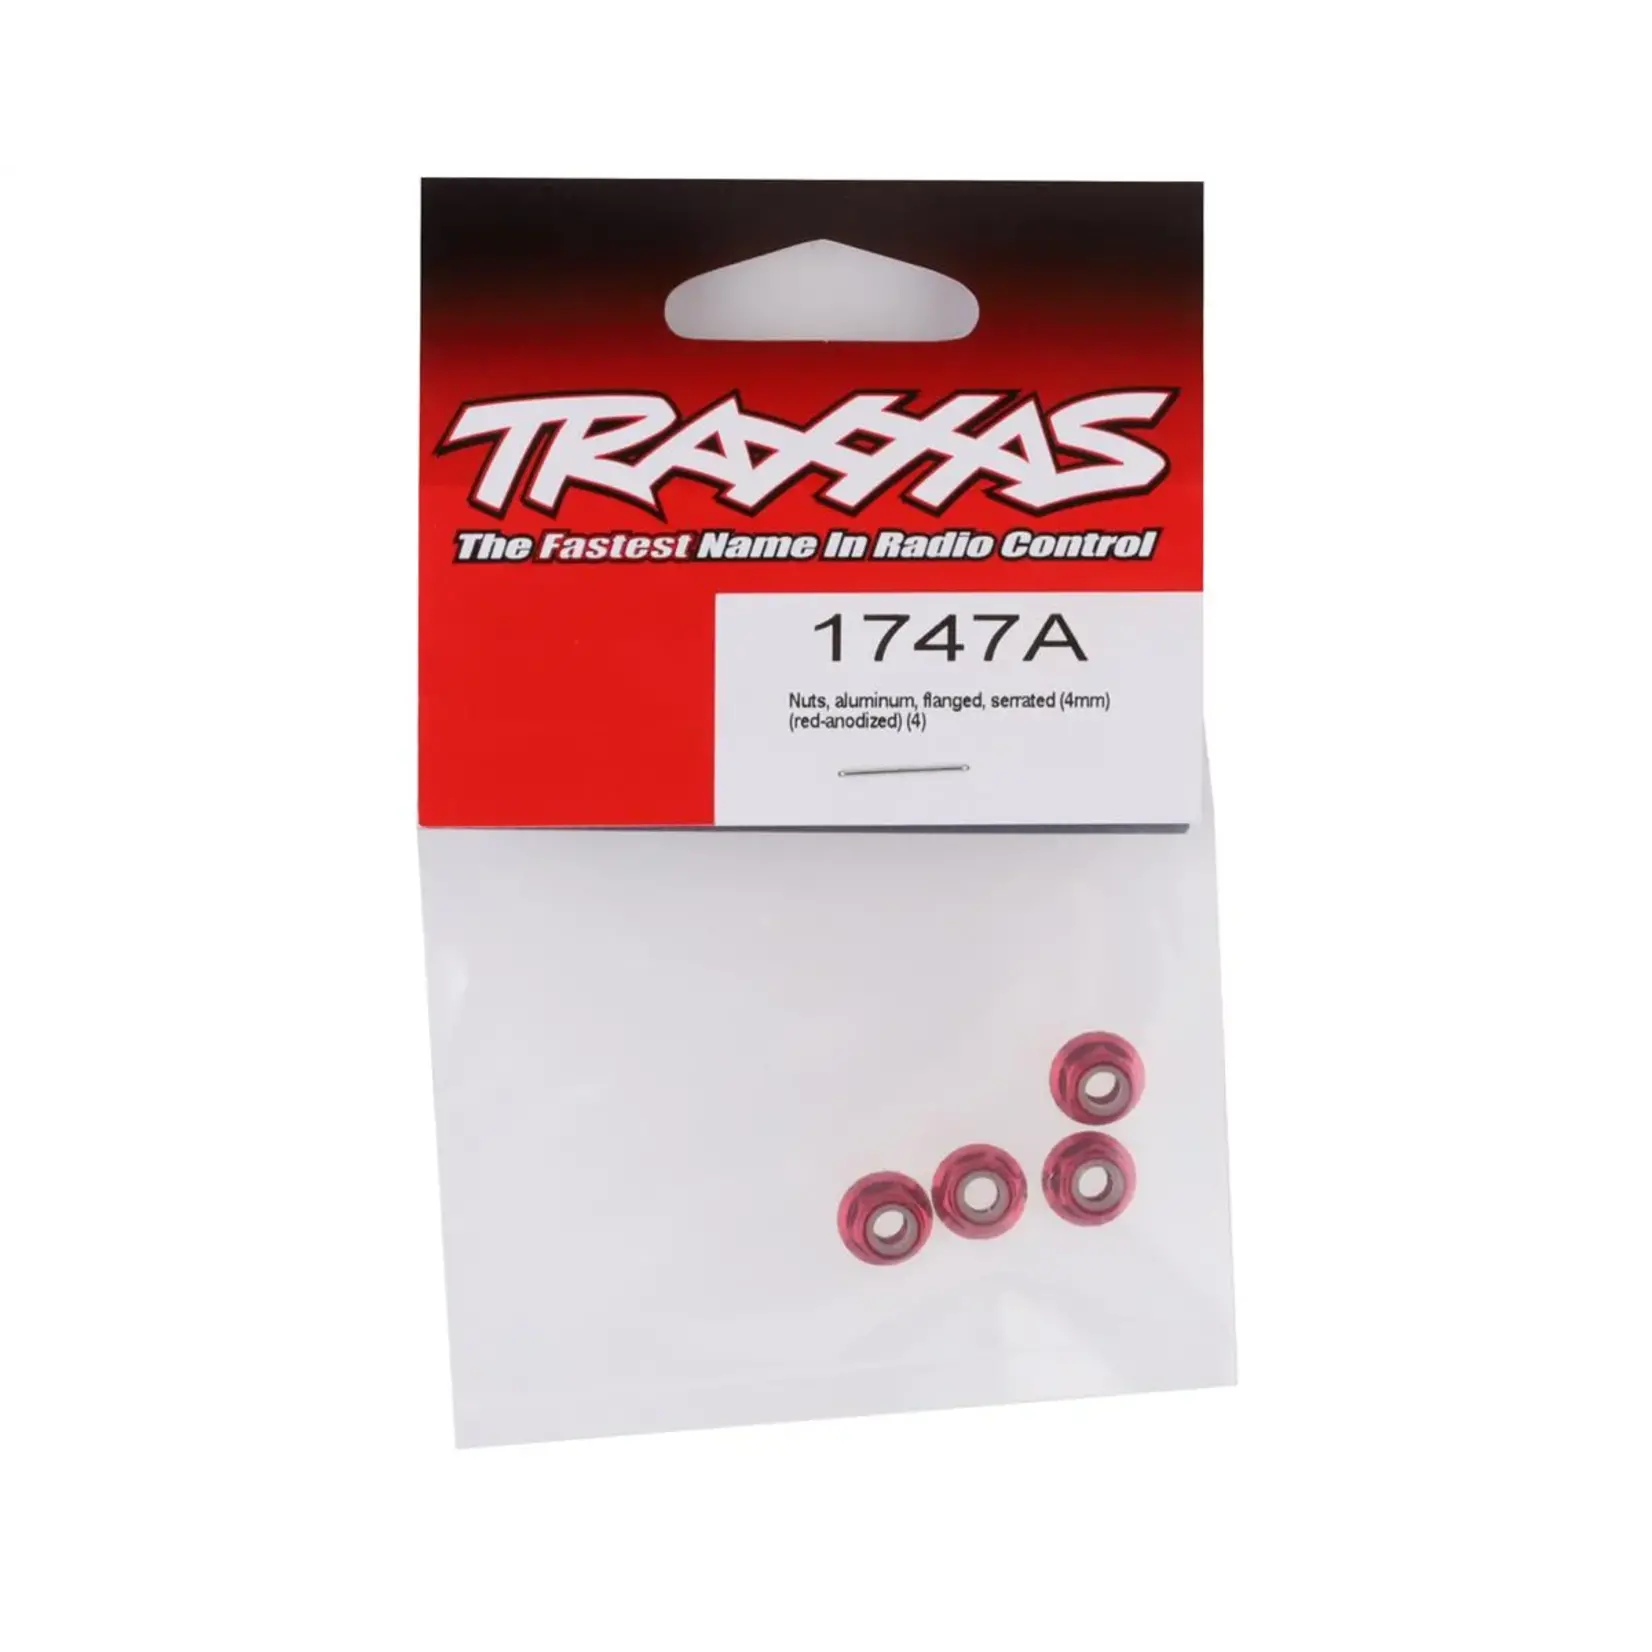 Traxxas Traxxas 4mm Aluminum Flanged Serrated Nuts (Red) (4) #1747A